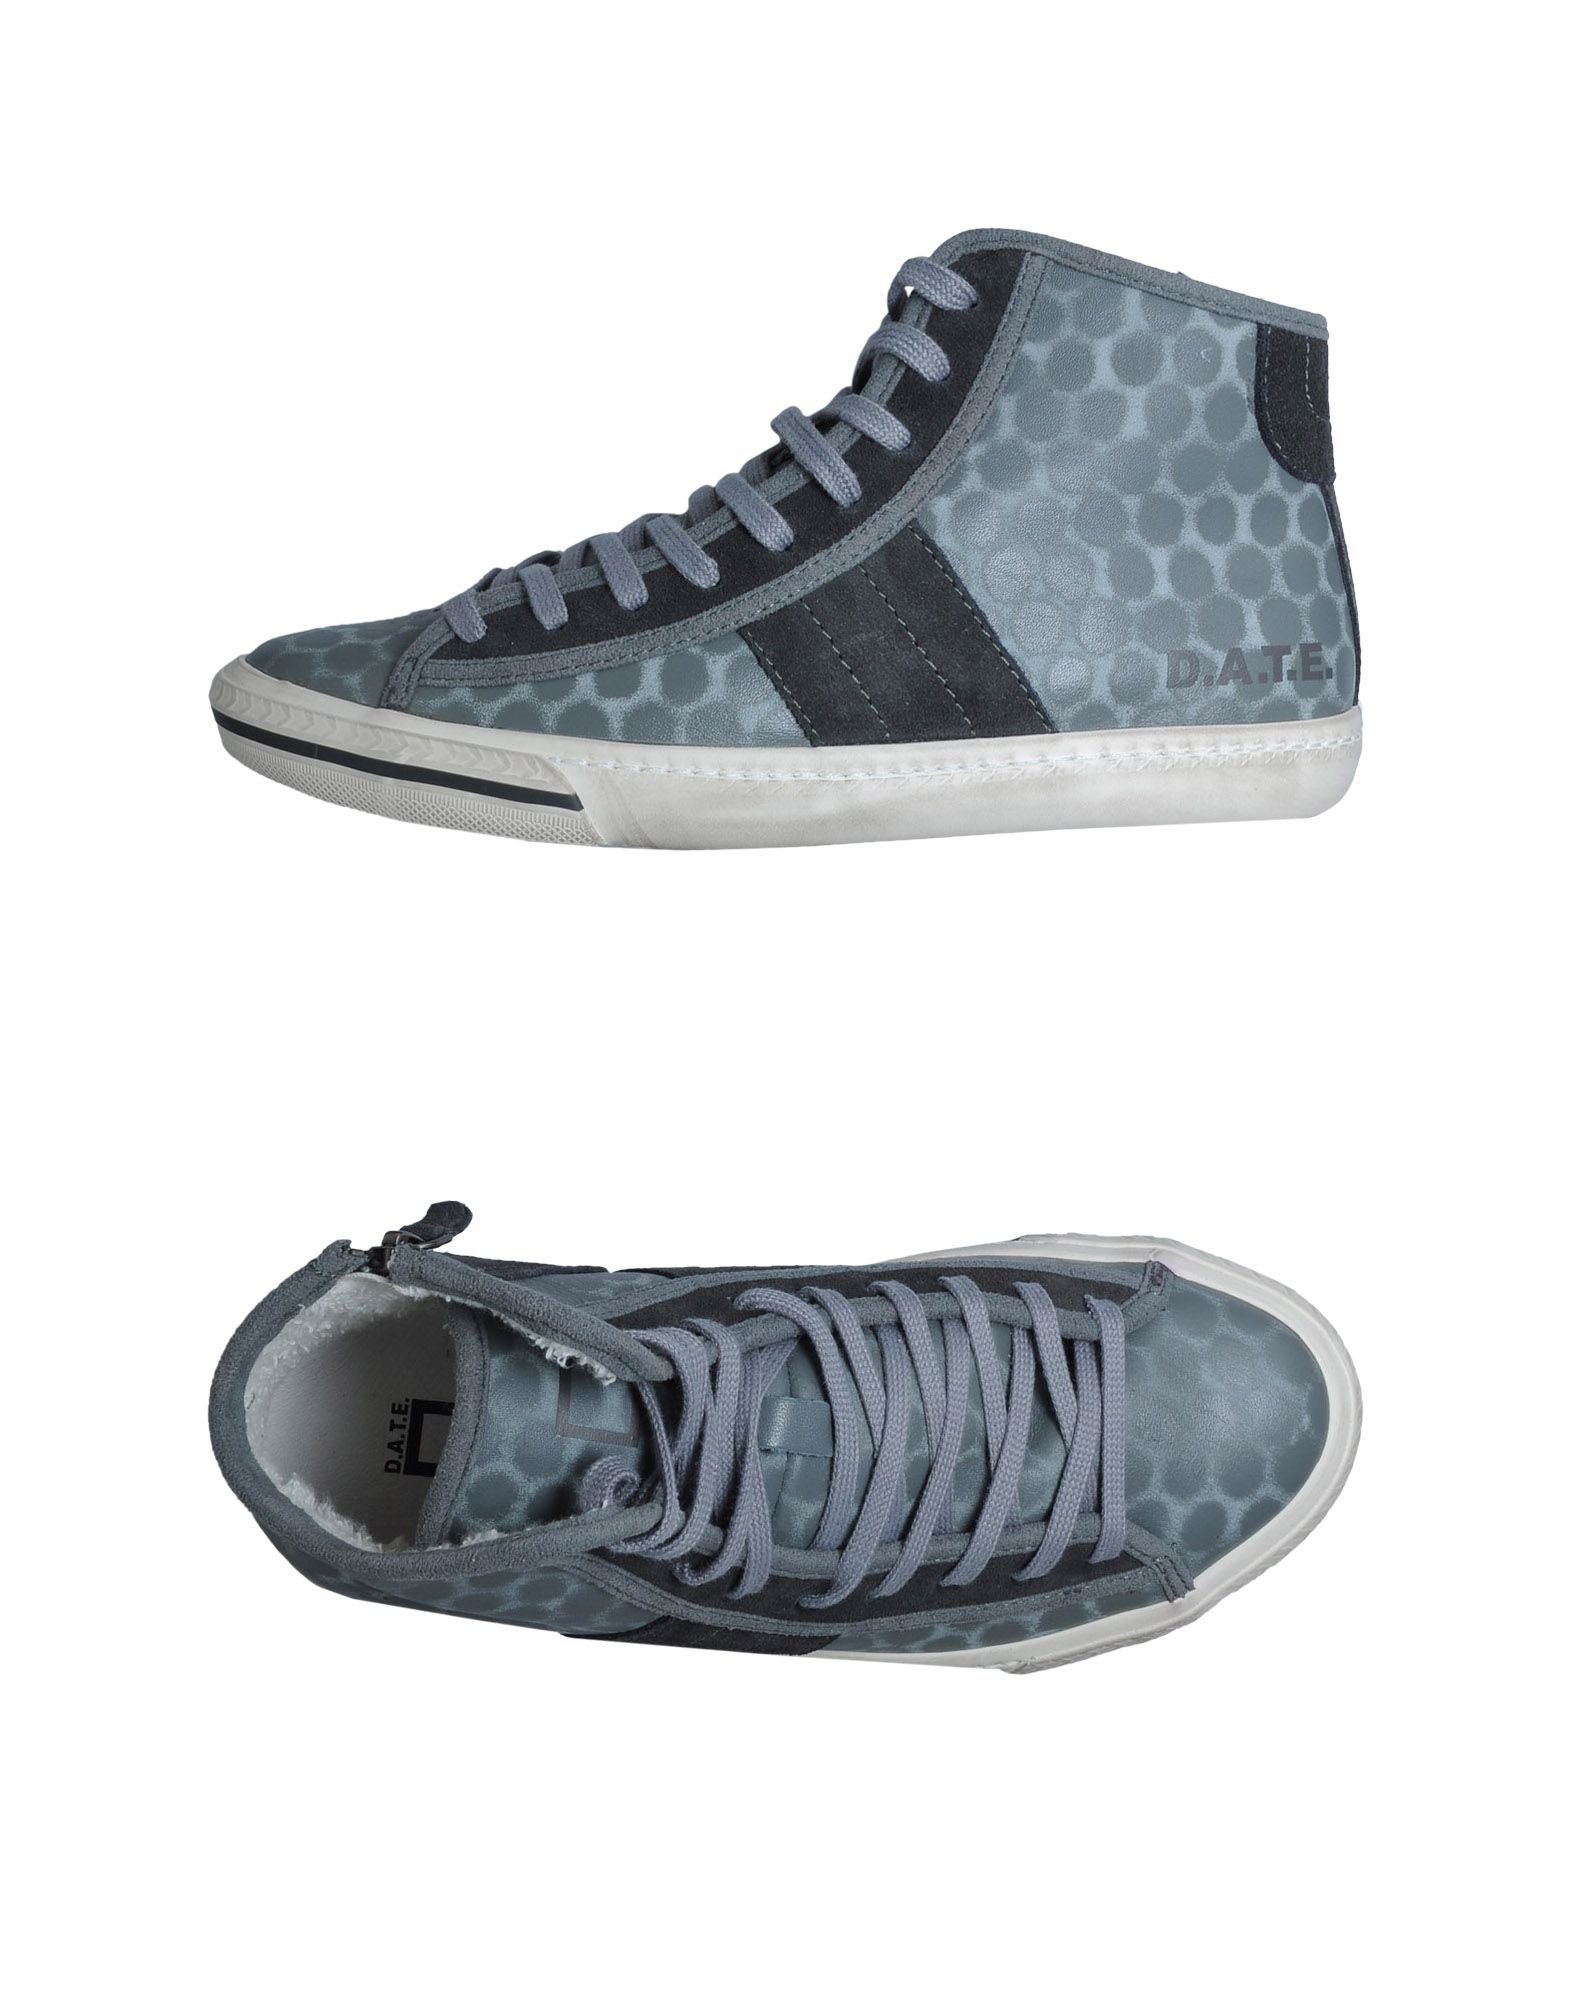 Foto D.A.T.E. Sneakers Altas Mujer Gris